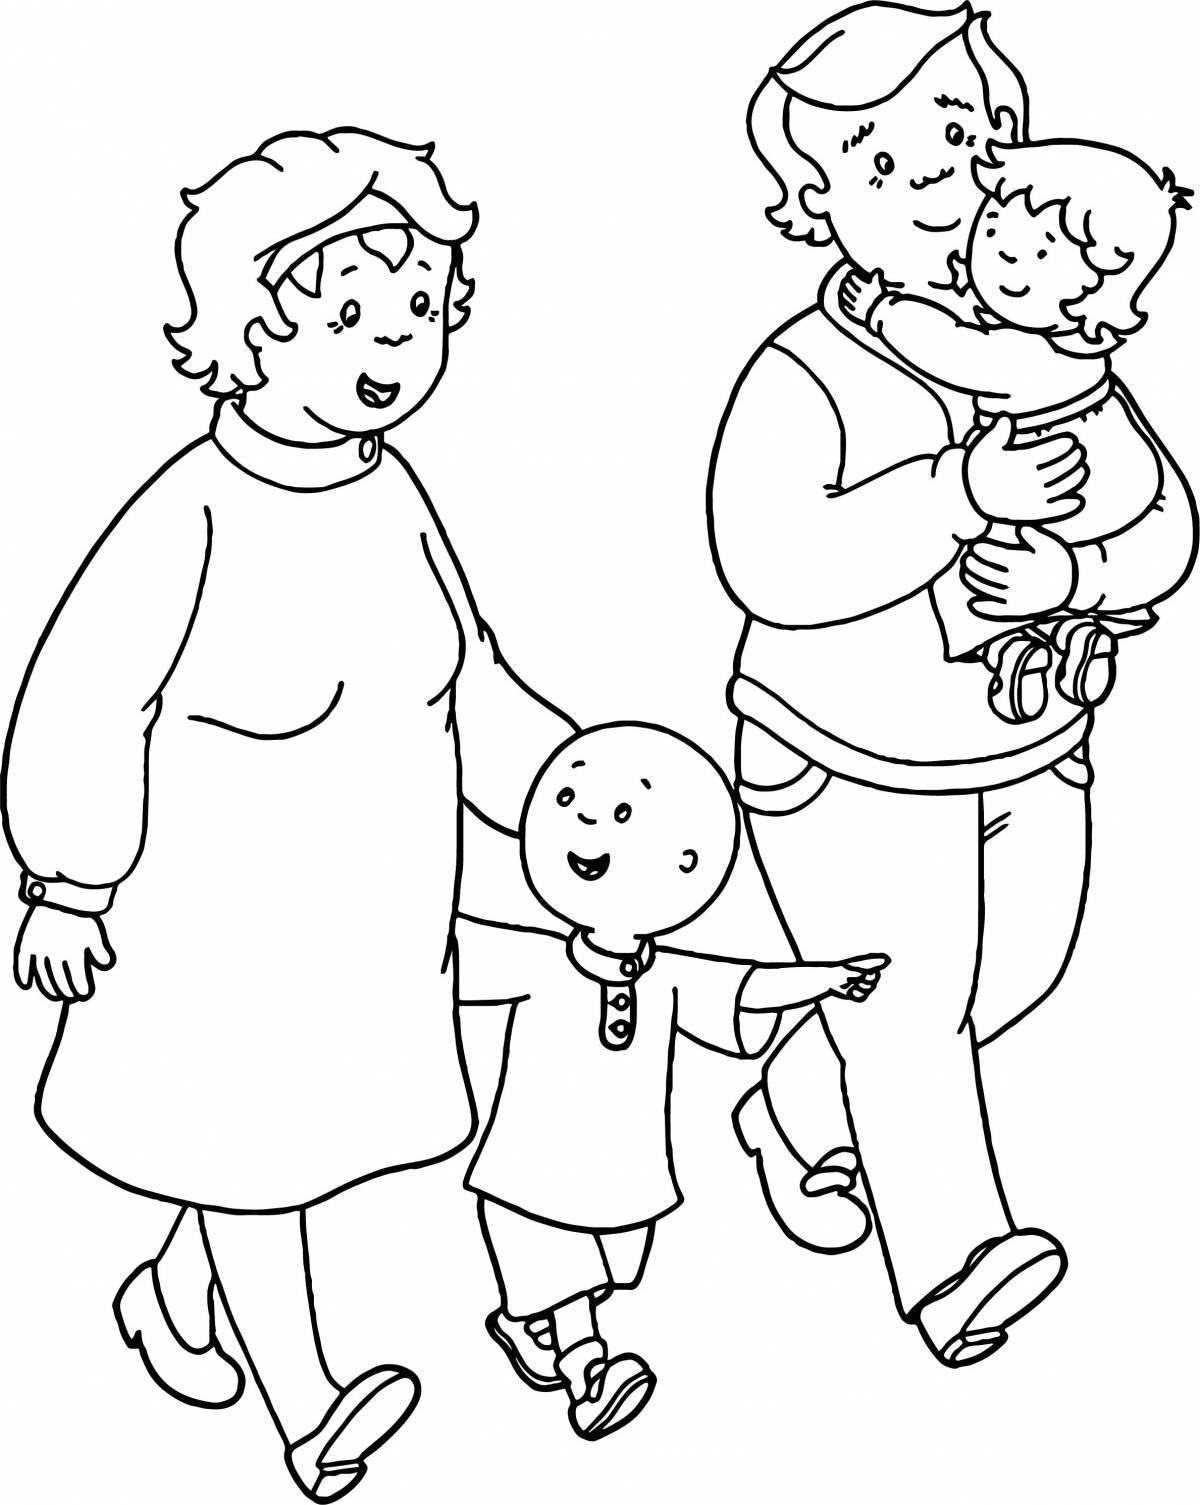 Great family coloring picture